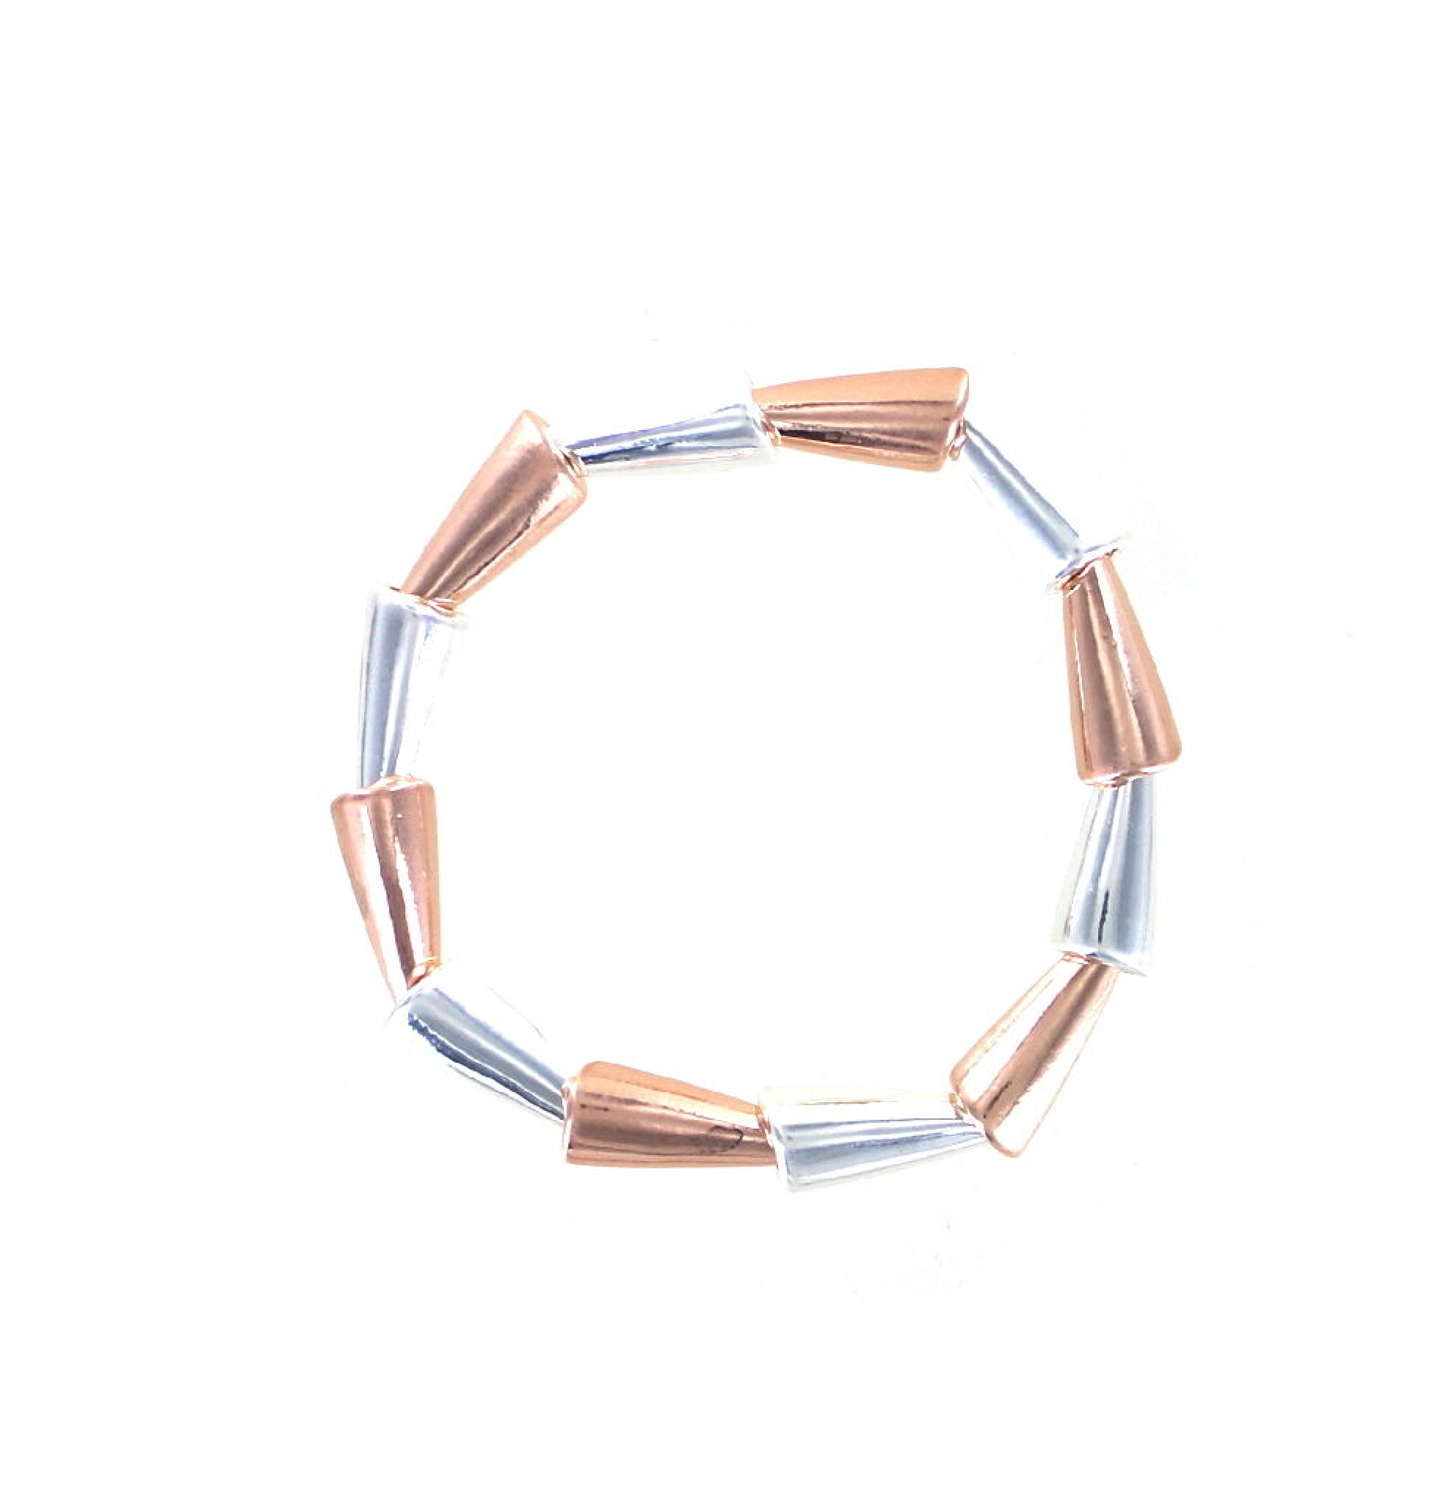 Rose gold and silver tone multi panel elasticated bracelet.